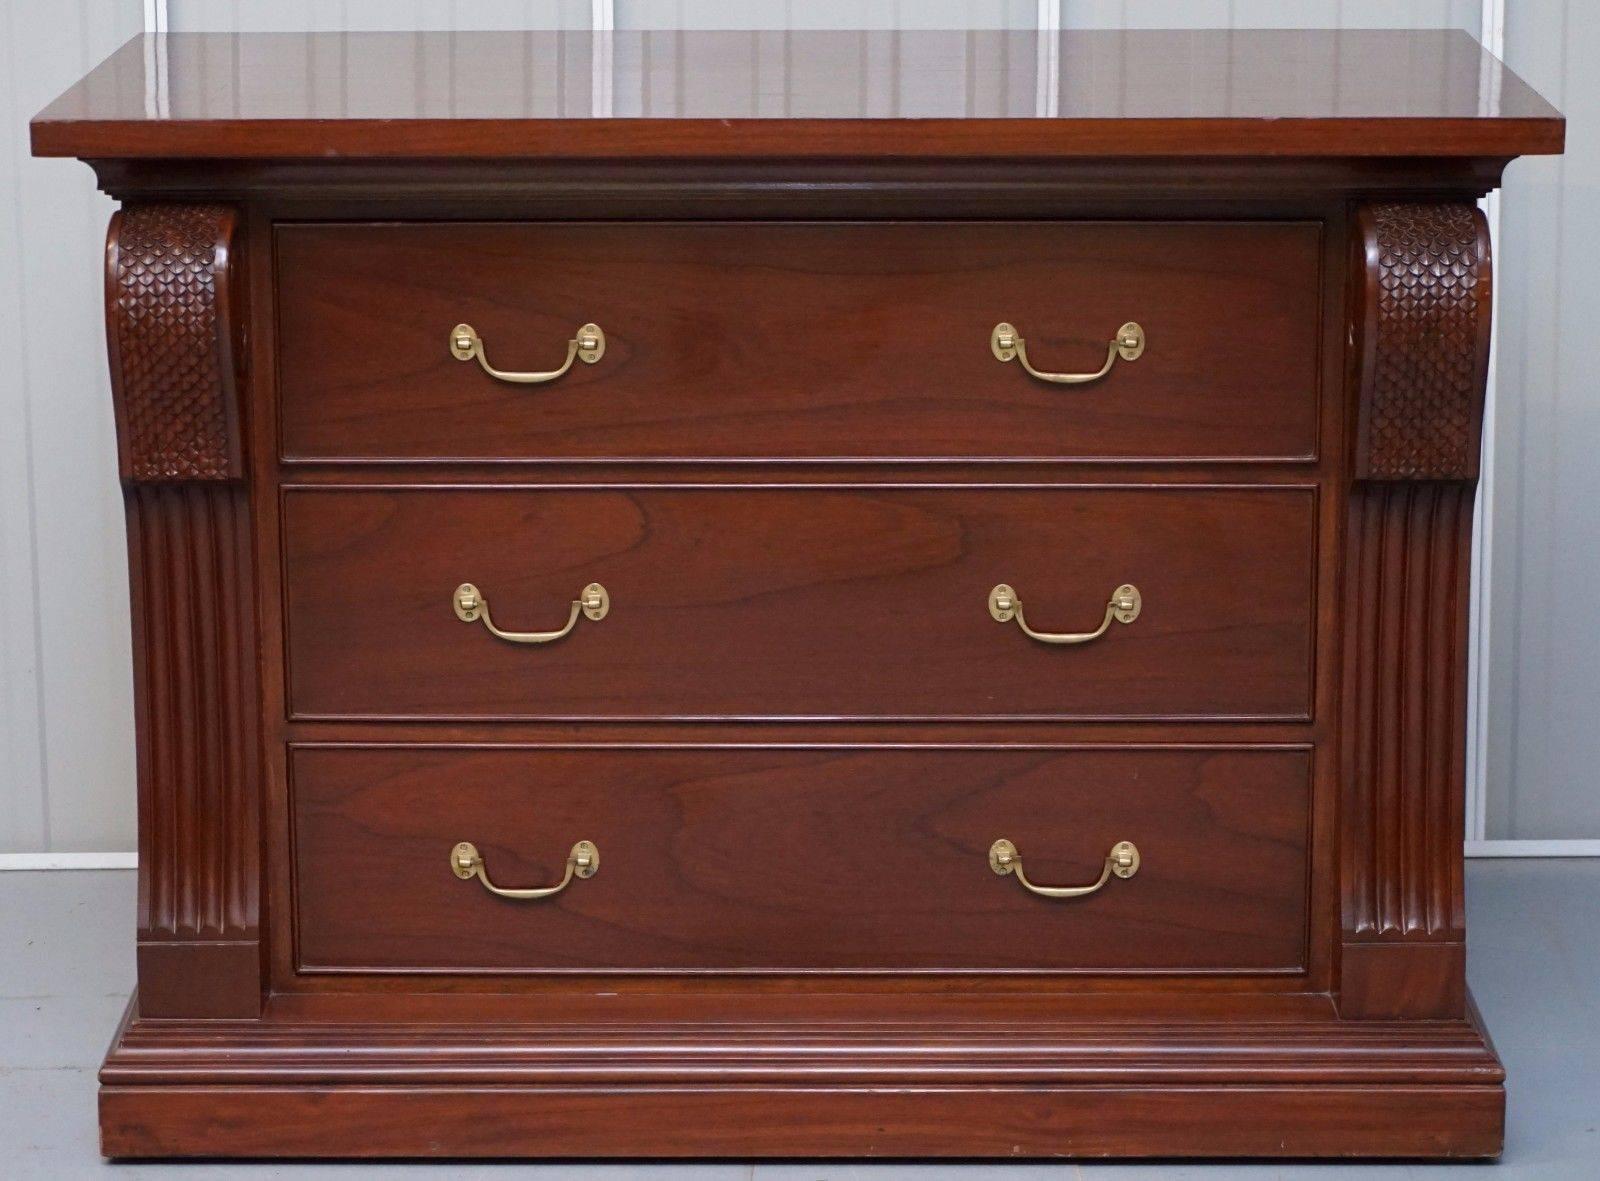 Wimbledon-Furniture

Wimbledon-Furniture is delighted to offer for sale this lovely matching pair of absolutely ginormous Regency style mahogany chests of drawers

Please note the delivery fee listed is just a guide, for an accurate quote please